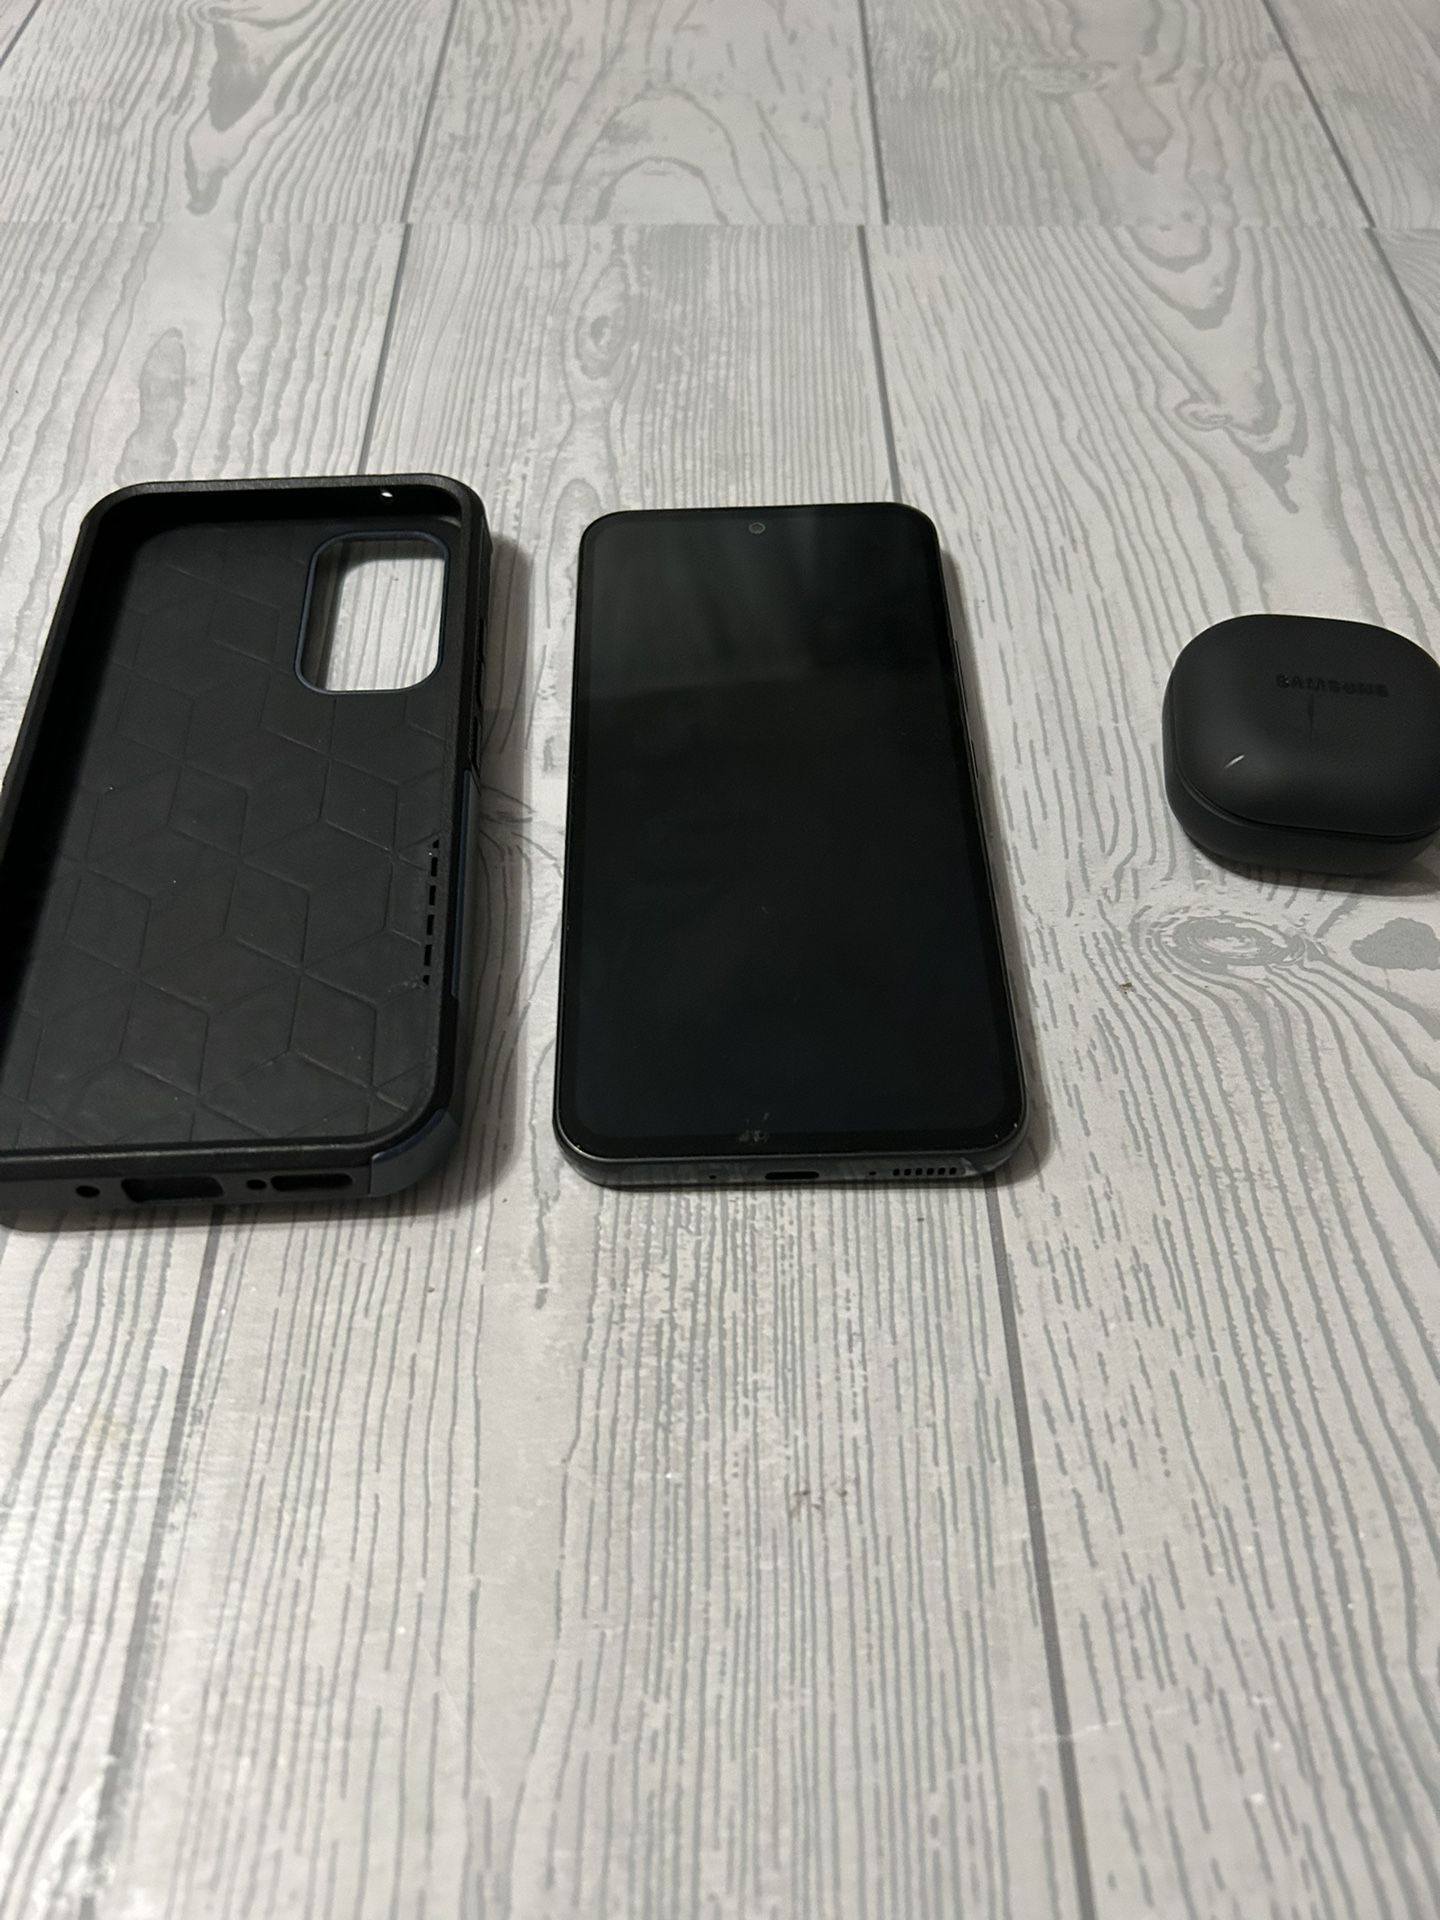 Samsung A54 & Galaxy Buds 2 Pro - Excellent Condition